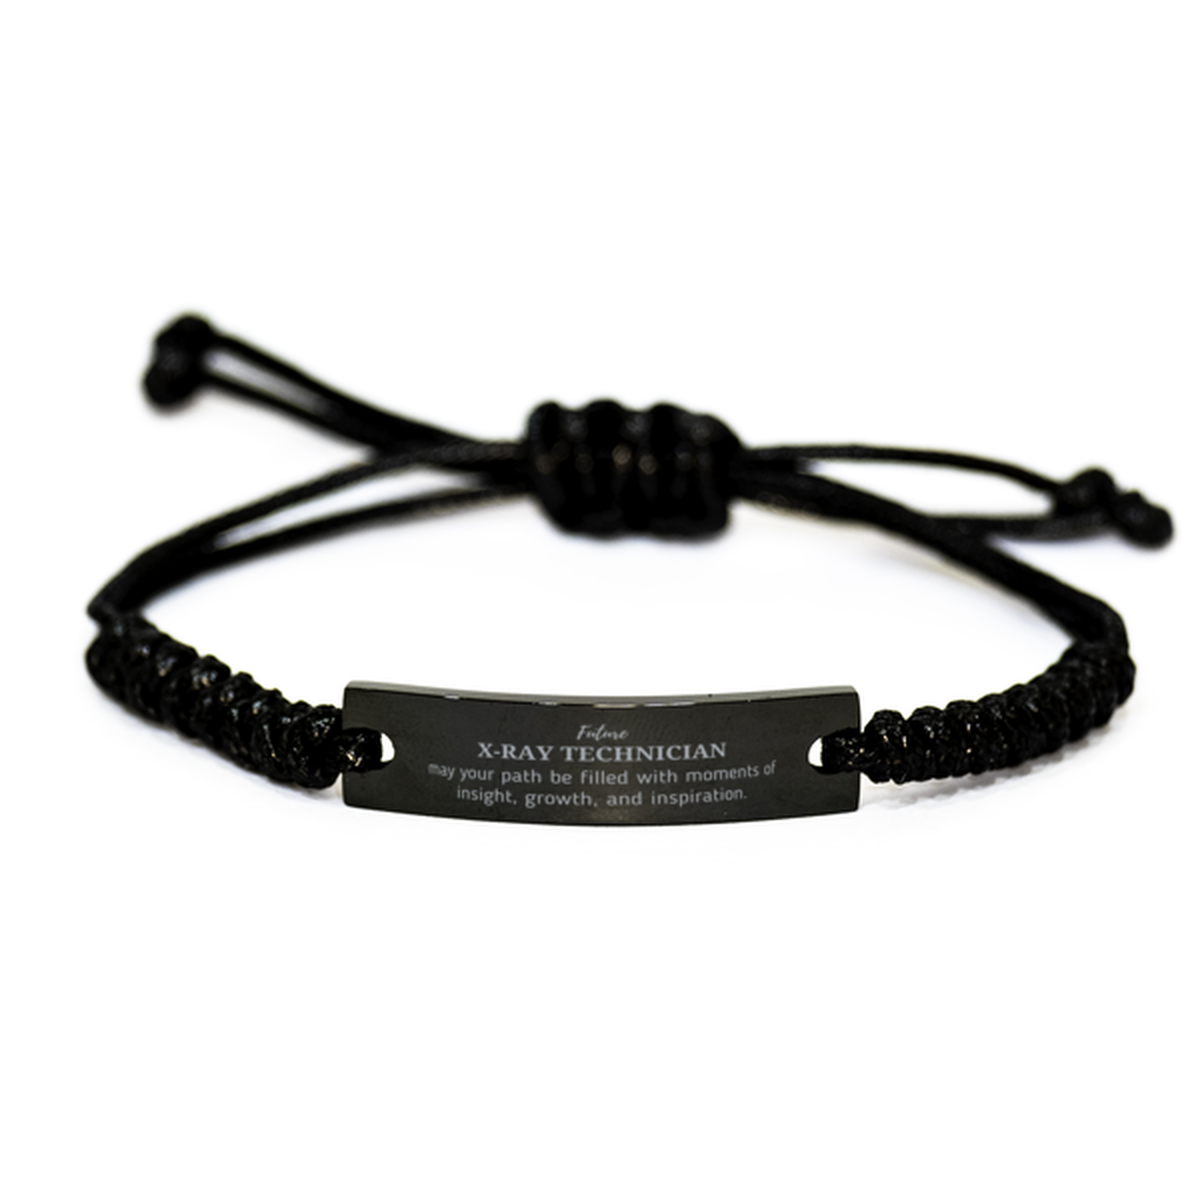 Future X-Ray Technician Gifts, May your path be filled with moments of insight, Graduation Gifts for New X-Ray Technician, Christmas Unique Black Rope Bracelet For Men, Women, Friends